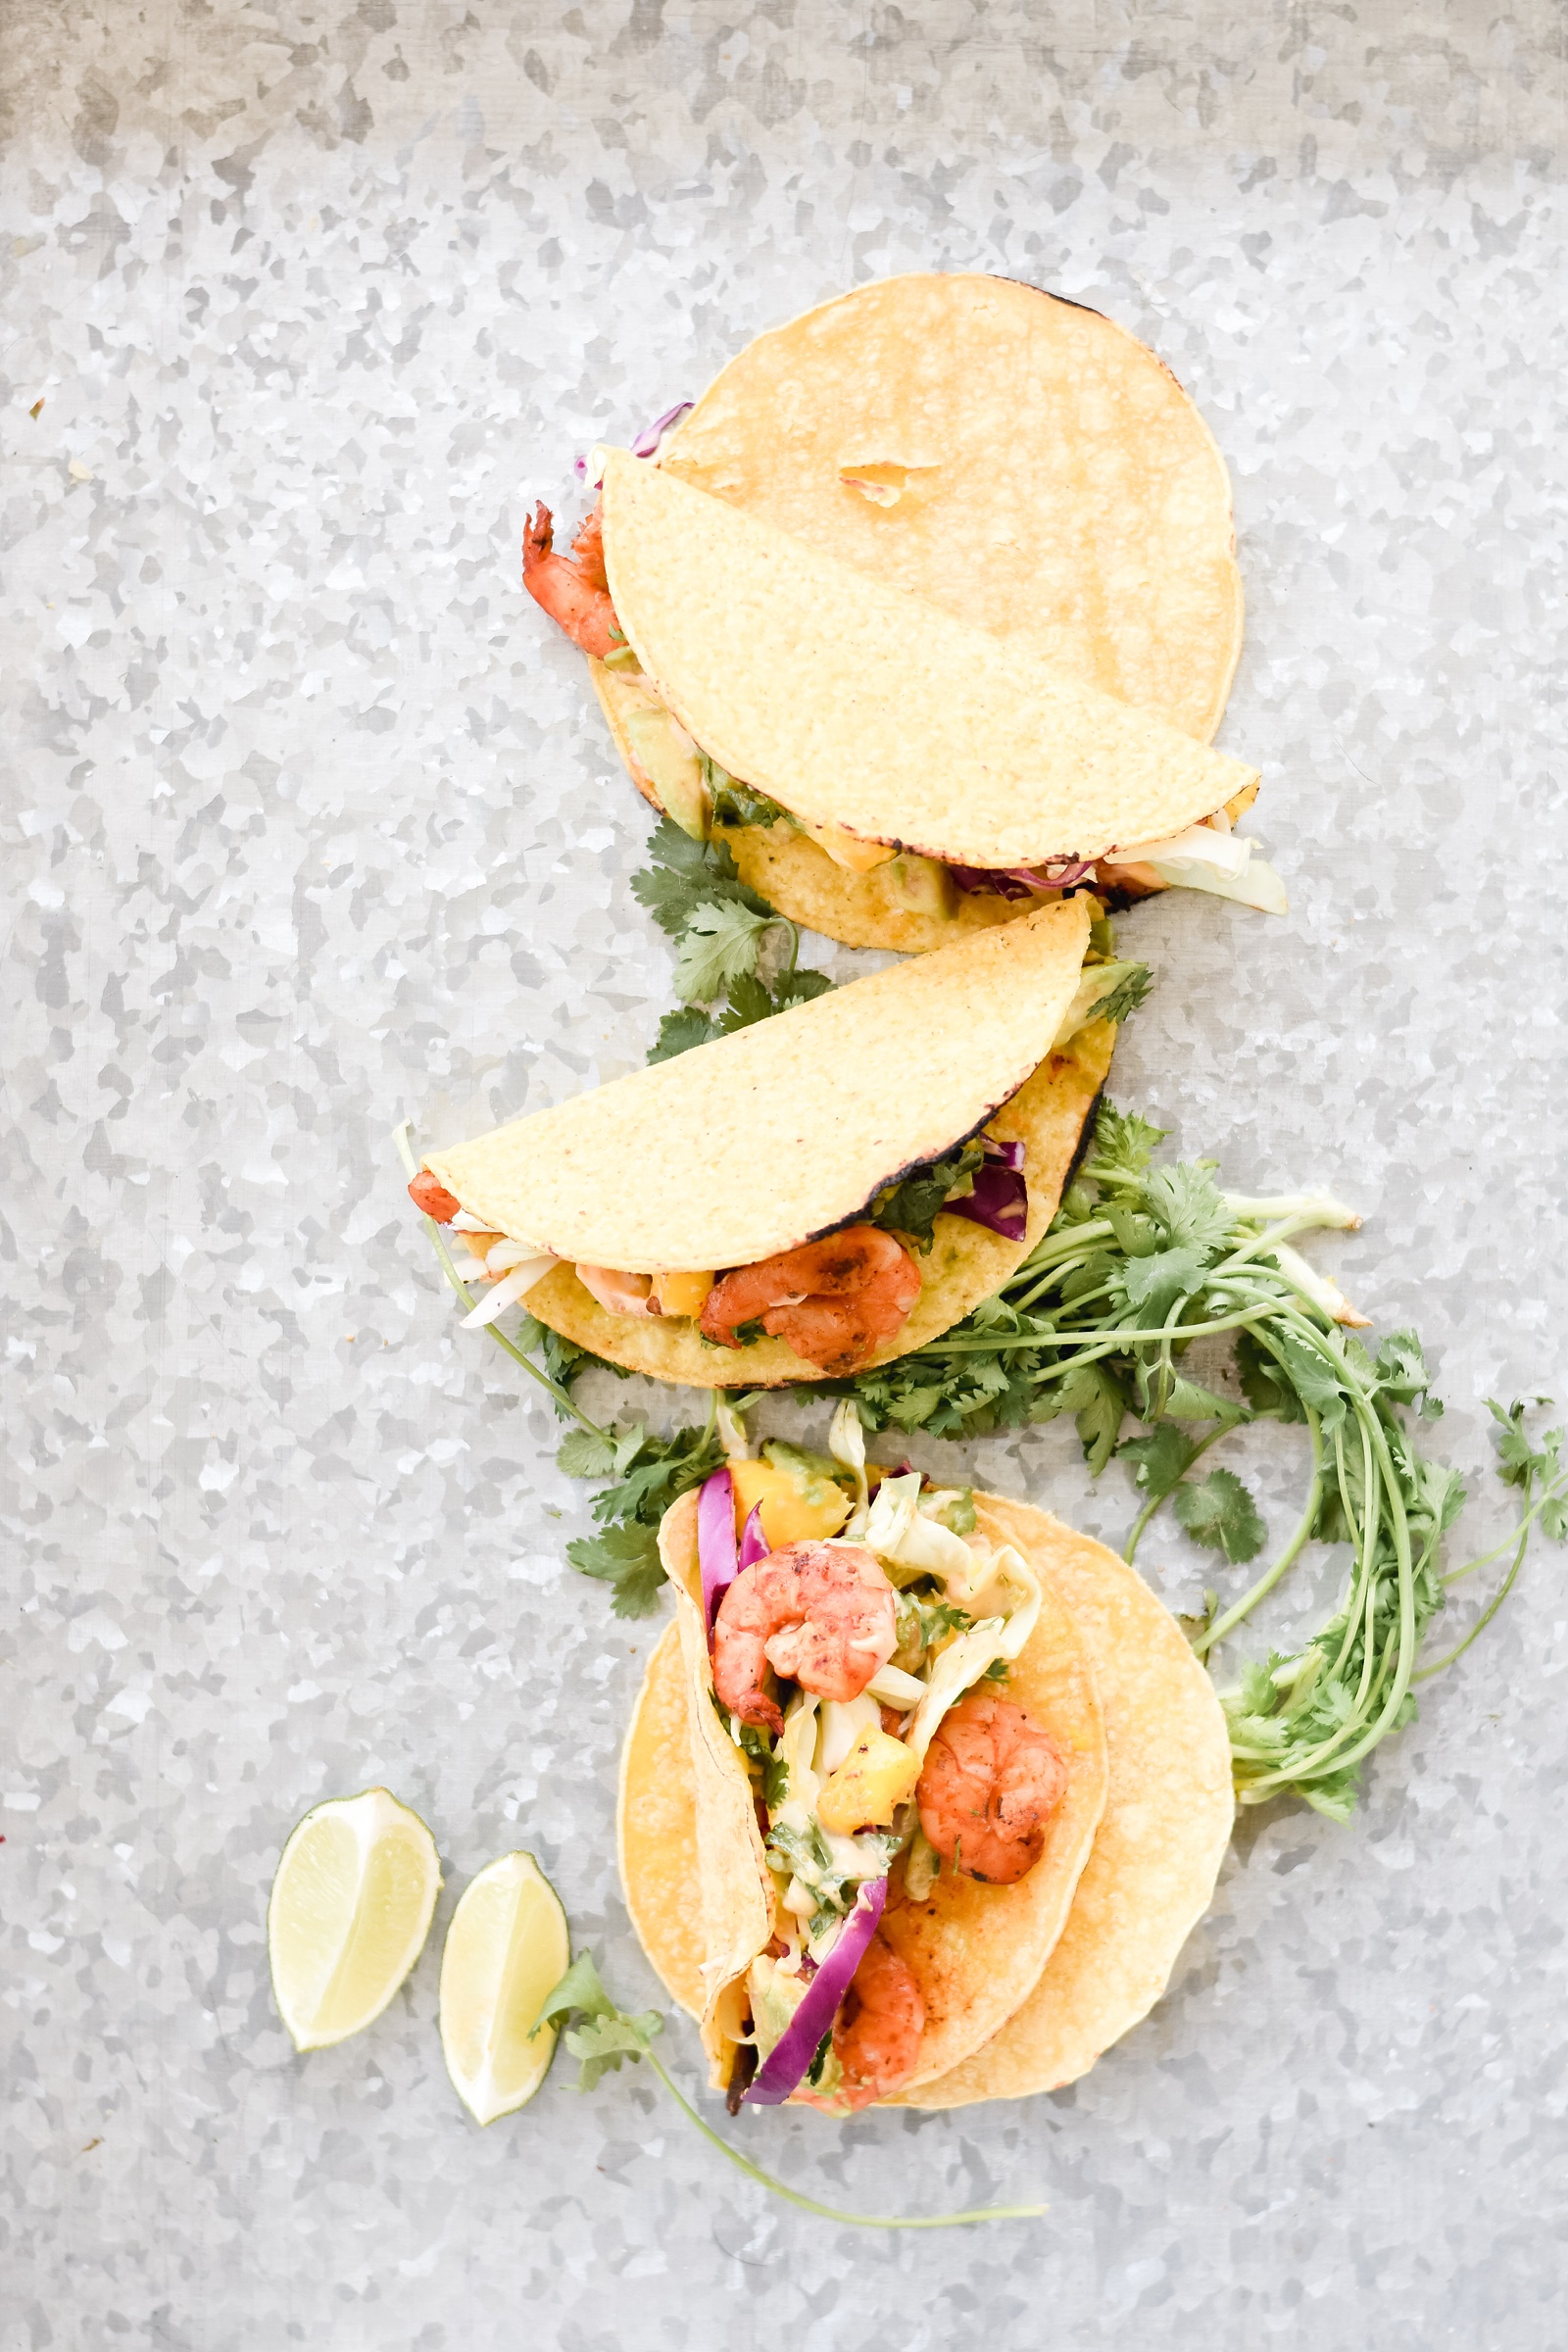 Grilled Spicy Shrimp Tacos with Avocado Mango Salsa and Chipotle Mayo